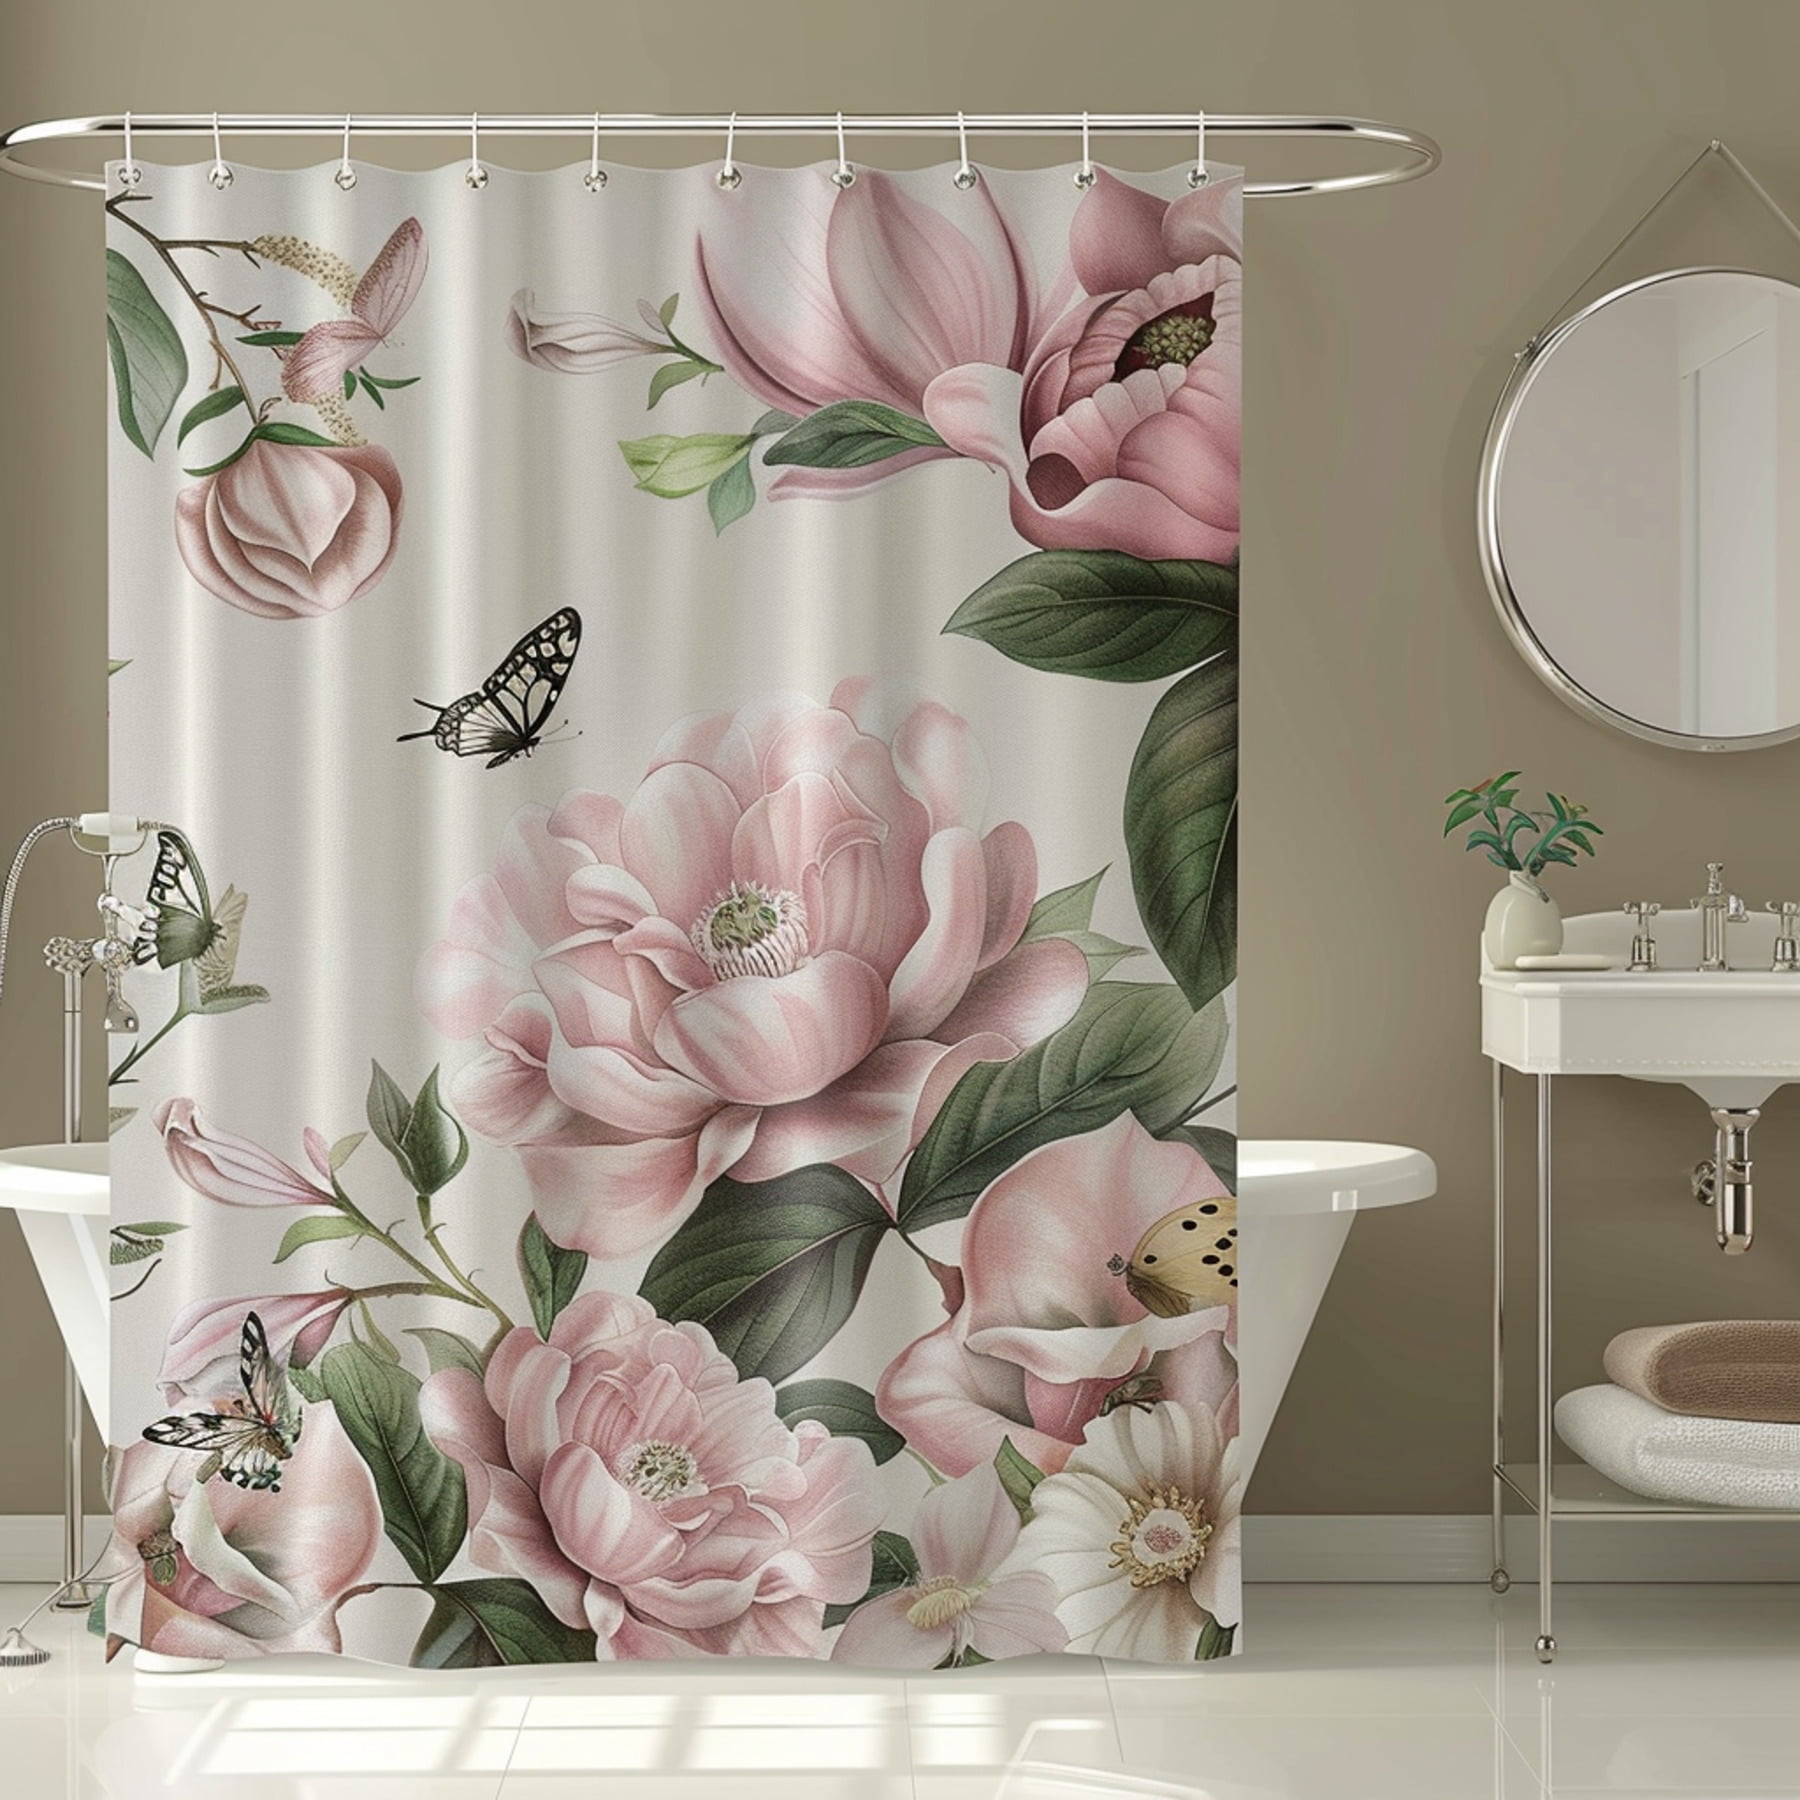 Vintage Pink Floral Shower Curtain with Butterflies and Roses Romantic ...